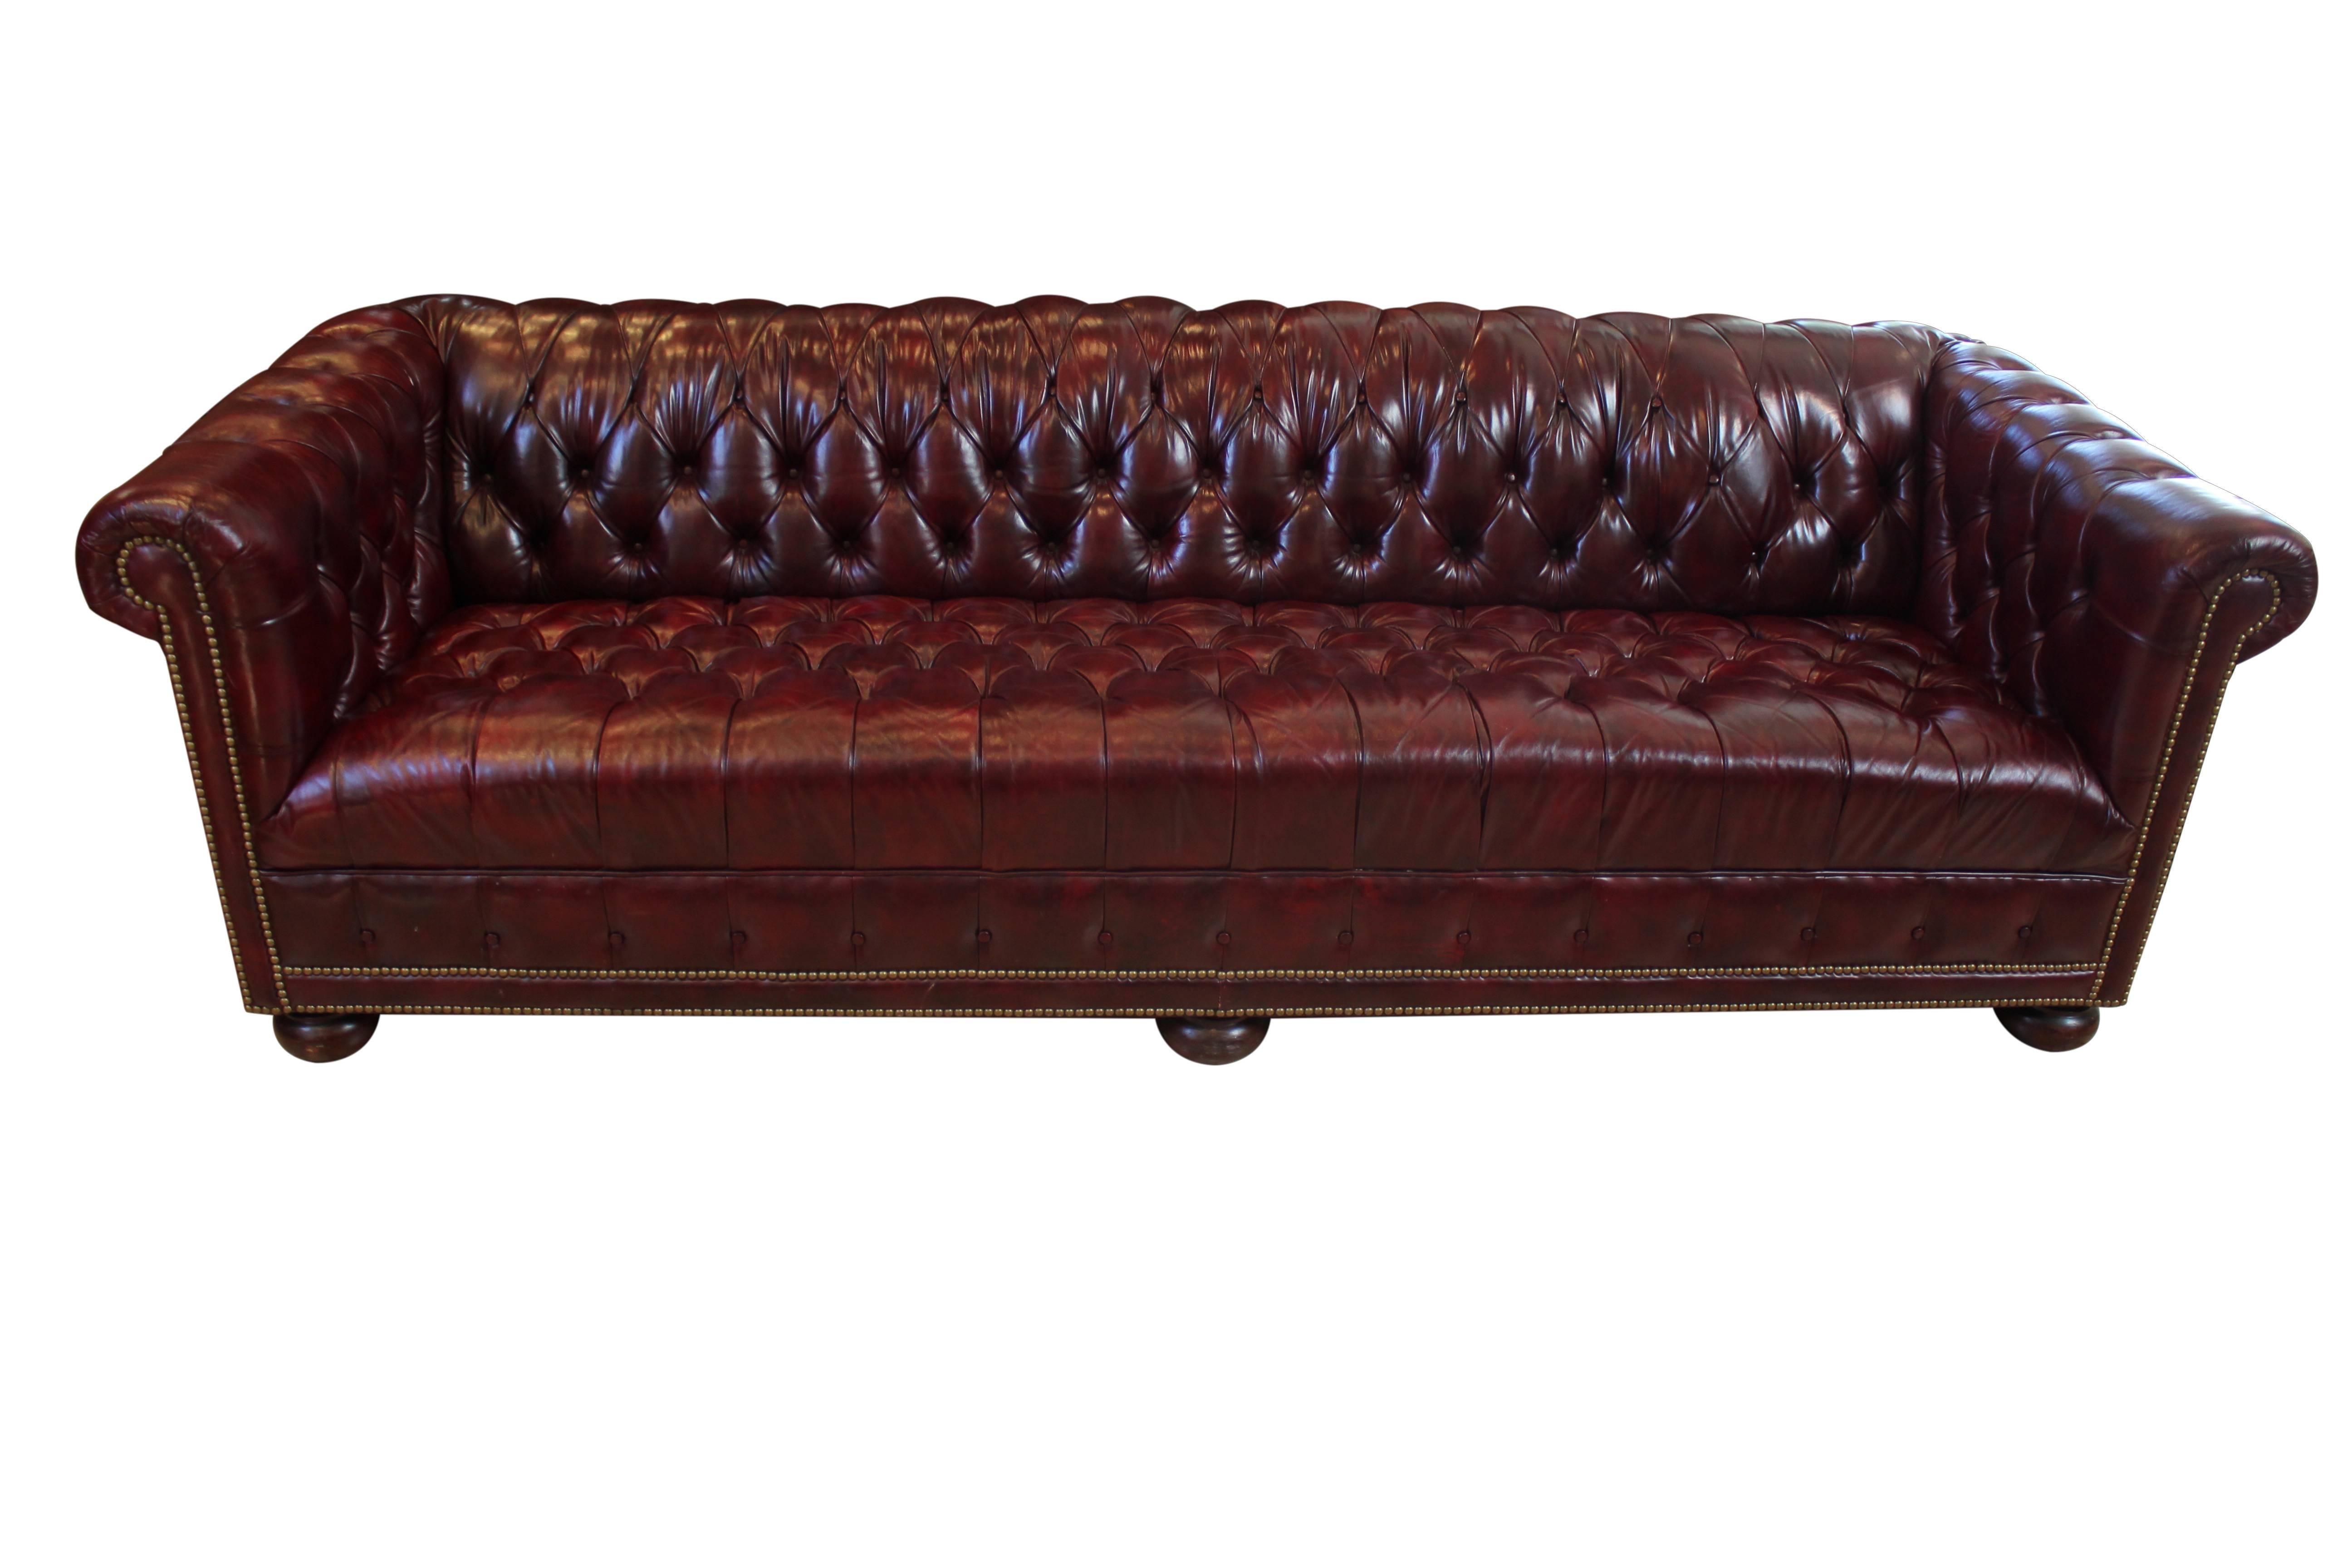 Vintage tufted leather 8' Chesterfield sofa. Oxblood leather with wooden bun feet; in excellent condition with very little wear, and no missing buttons or nail heads. The sofa is unusually long for a Chesterfield, and seats 3-4 comfortably.